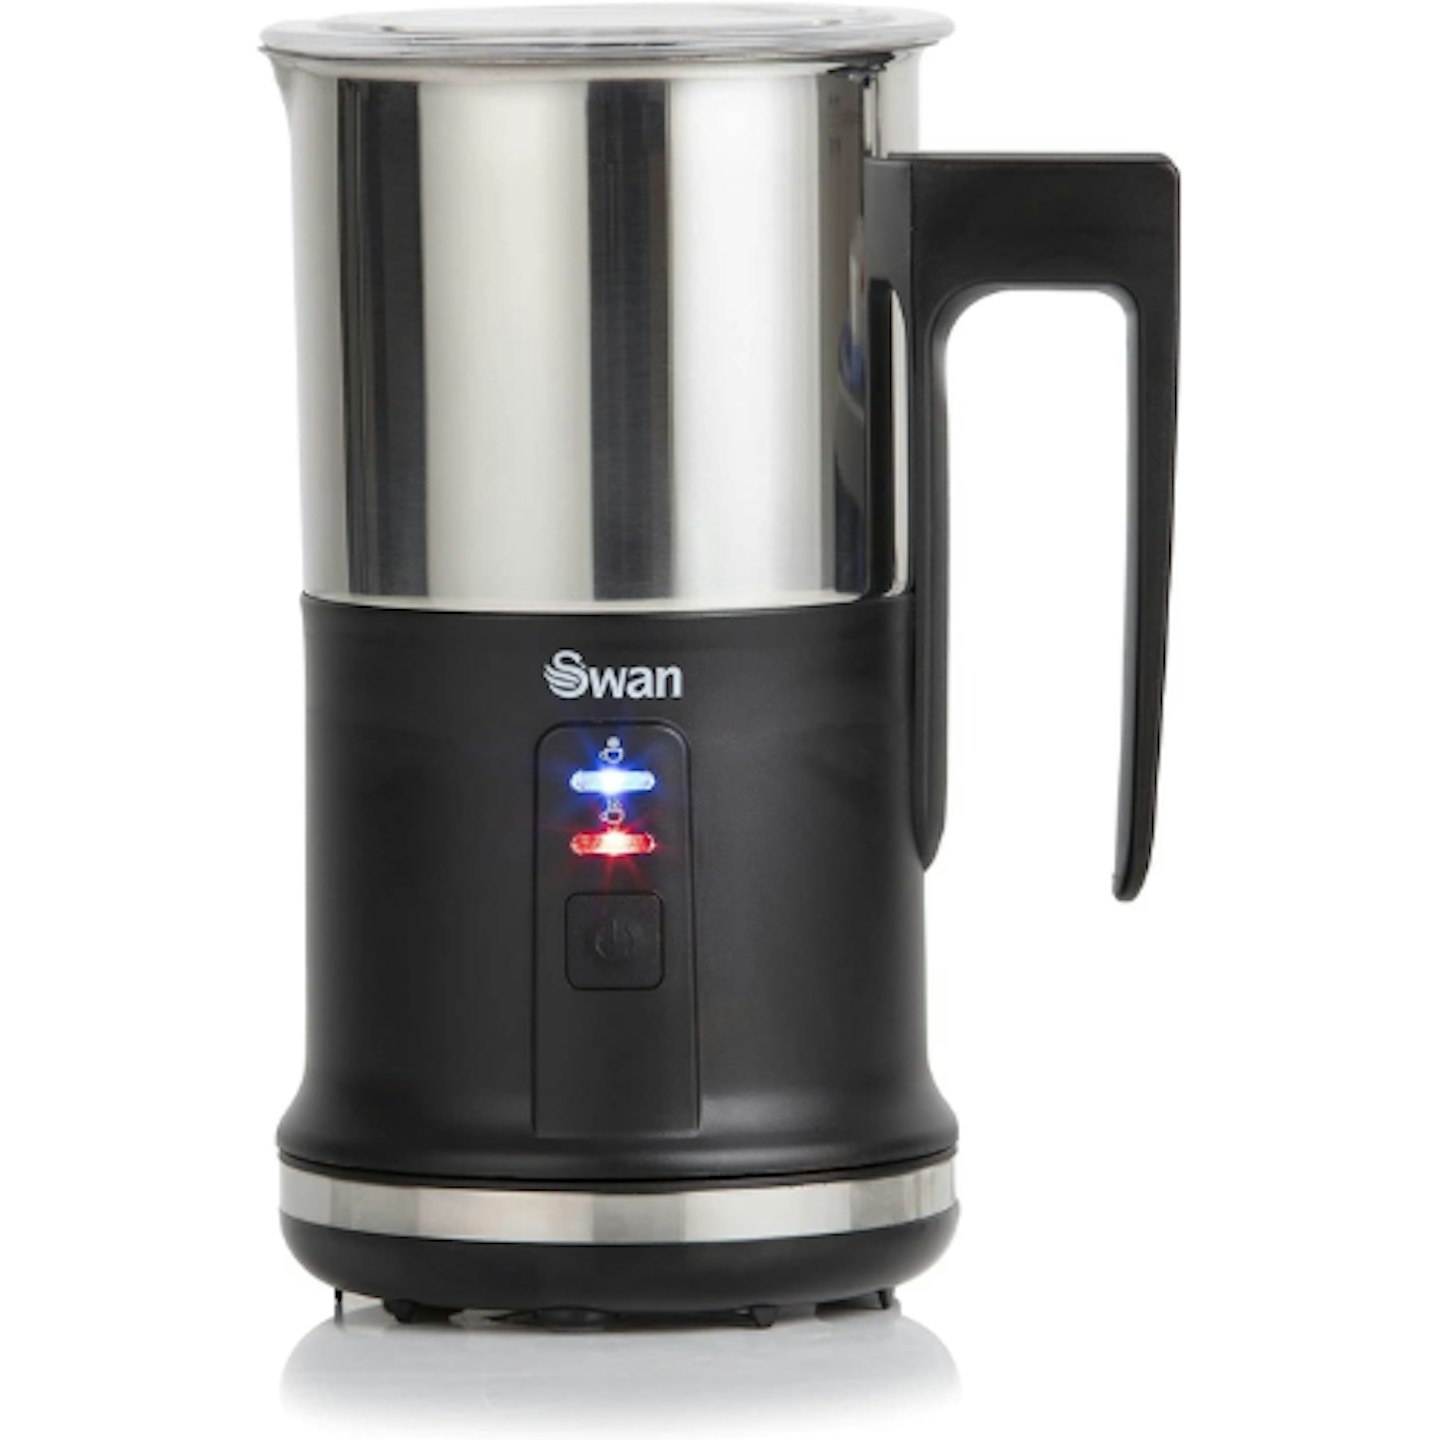 Swan Automatic Milk Frother and Warmer